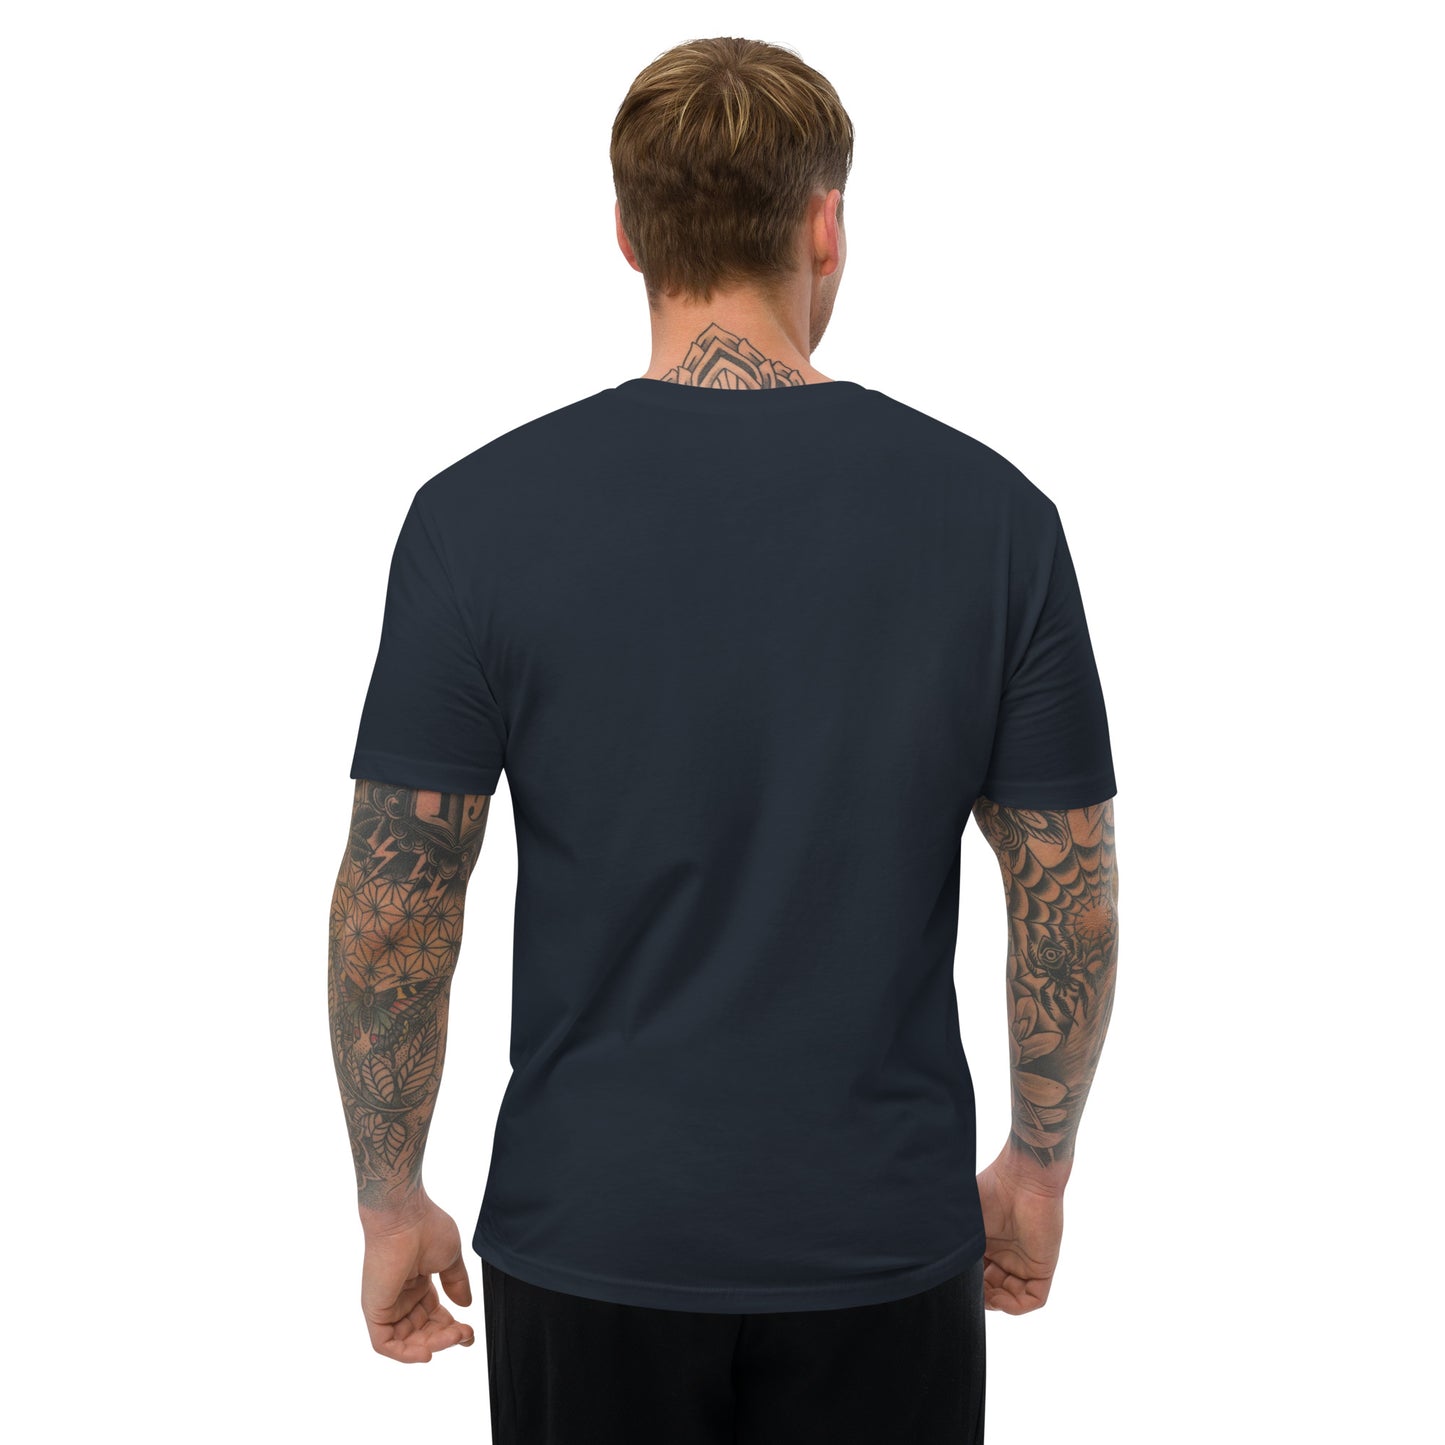 "Experience is the Mother of Creativity" Embroidered T-shirt (Athletic Fit)